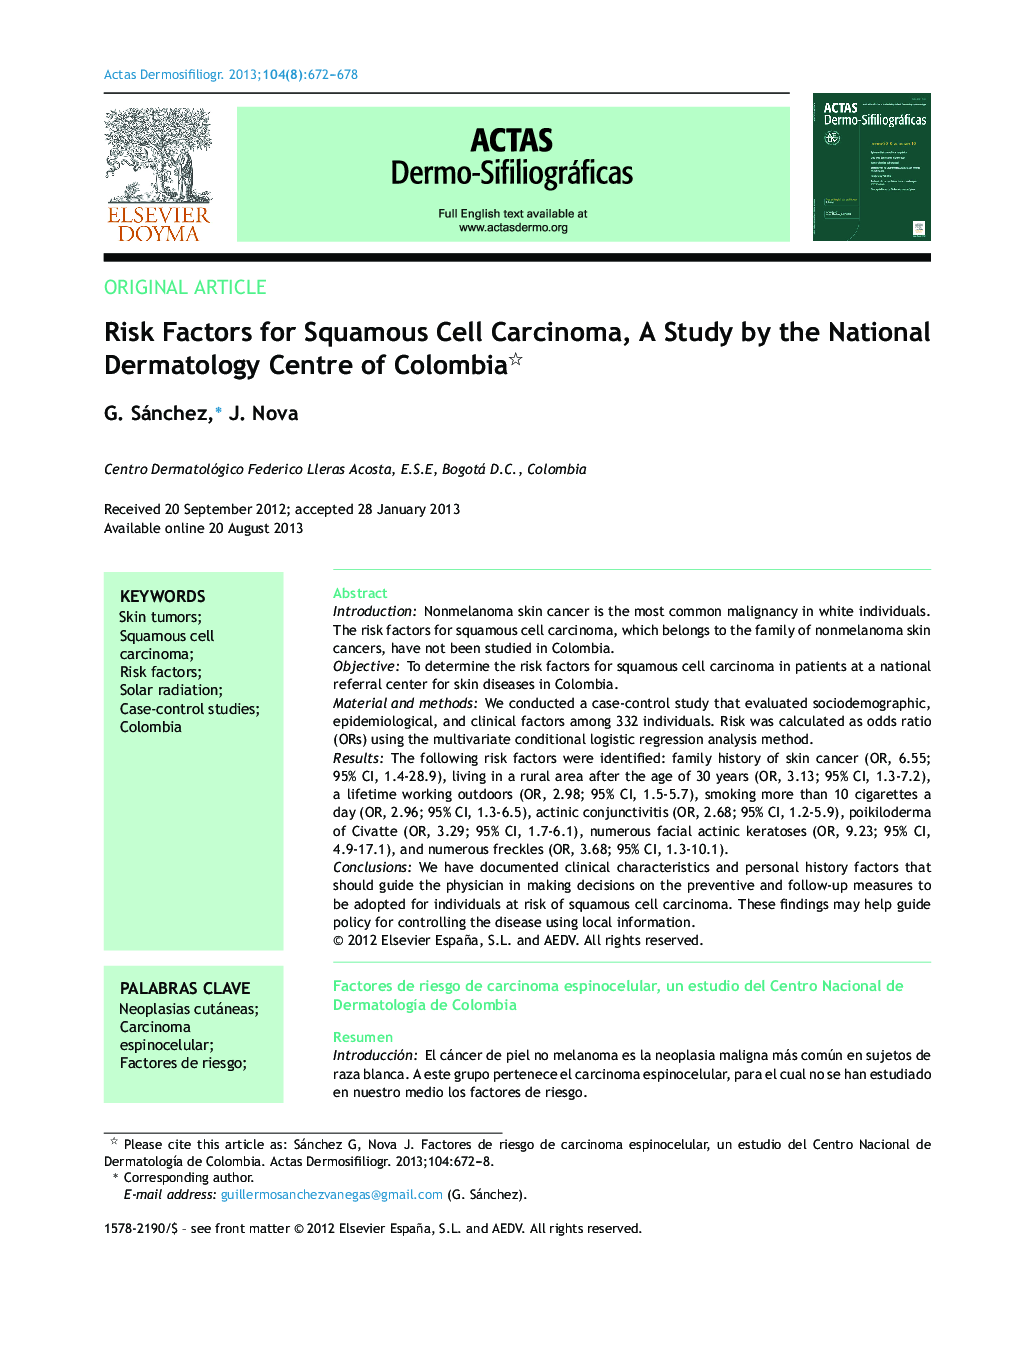 Risk Factors for Squamous Cell Carcinoma, A Study by the National Dermatology Centre of Colombia 